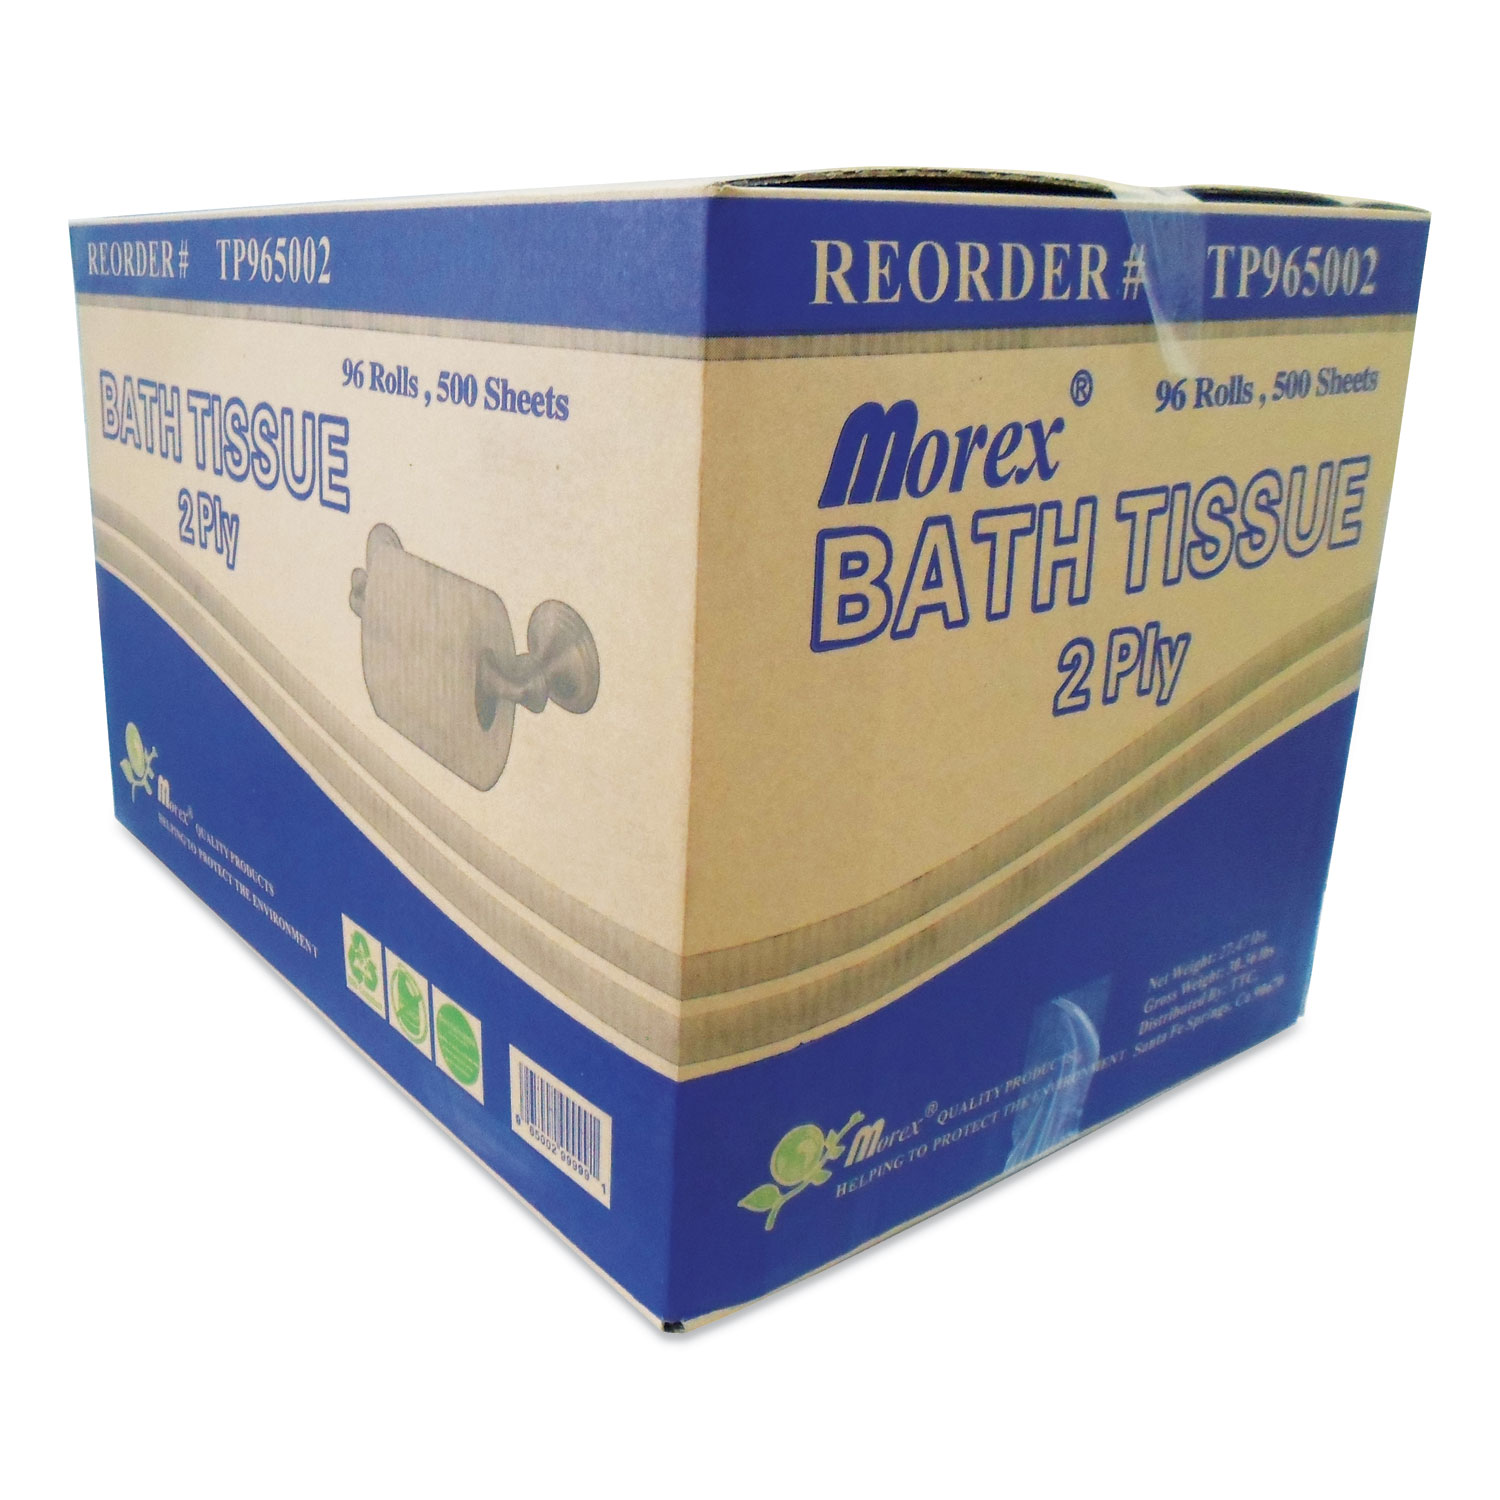 TEH TUNG Two-Ply Bath Tissue, Septic Safe, White, 500 Sheets/Roll, 96 Rolls/Carton